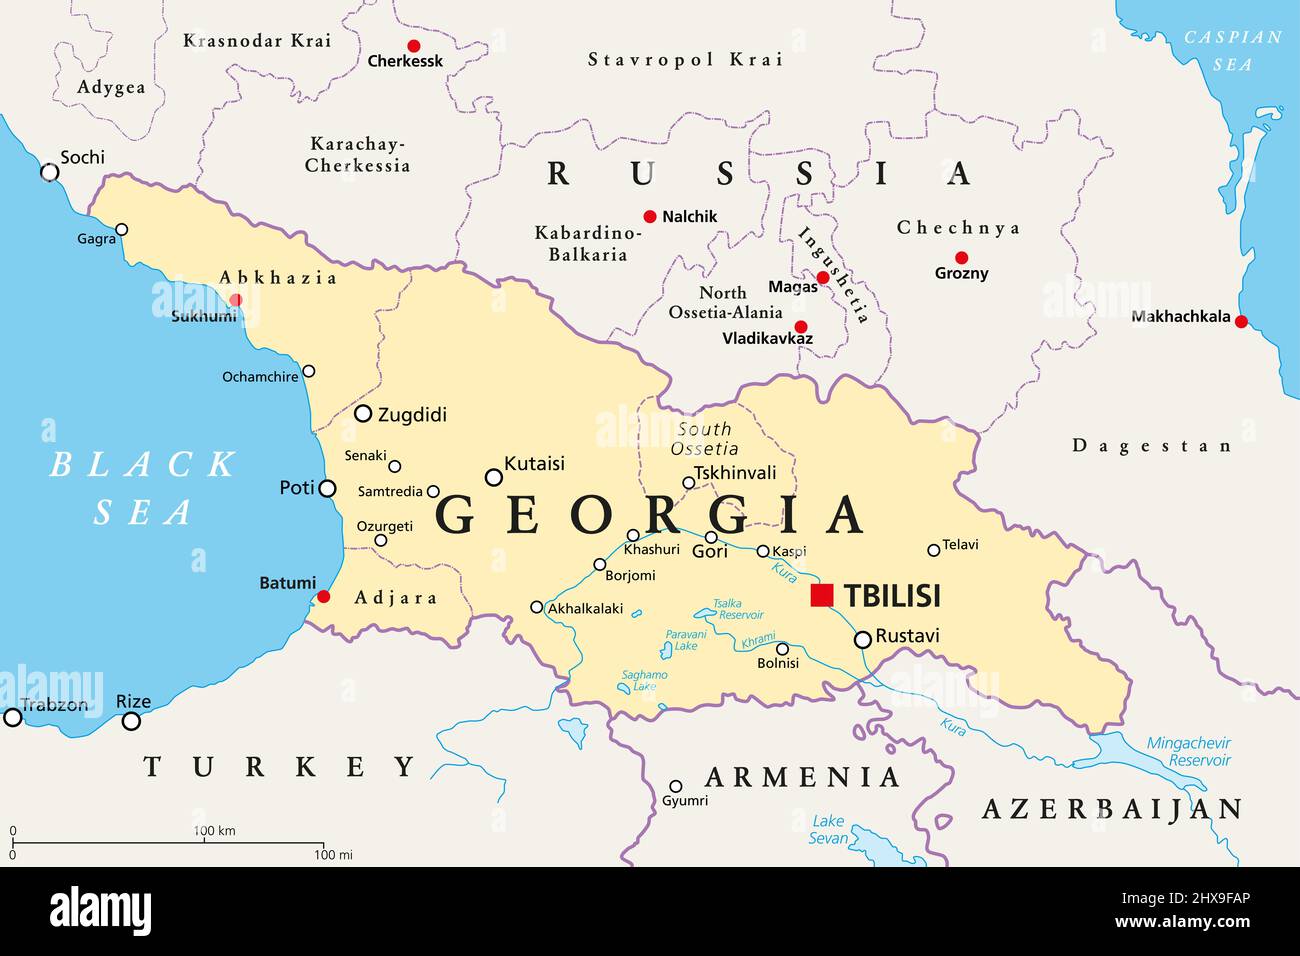 Georgia, political map, with capital Tbilisi, and international borders. Republic and transcontinental country in Eurasia. Stock Photo